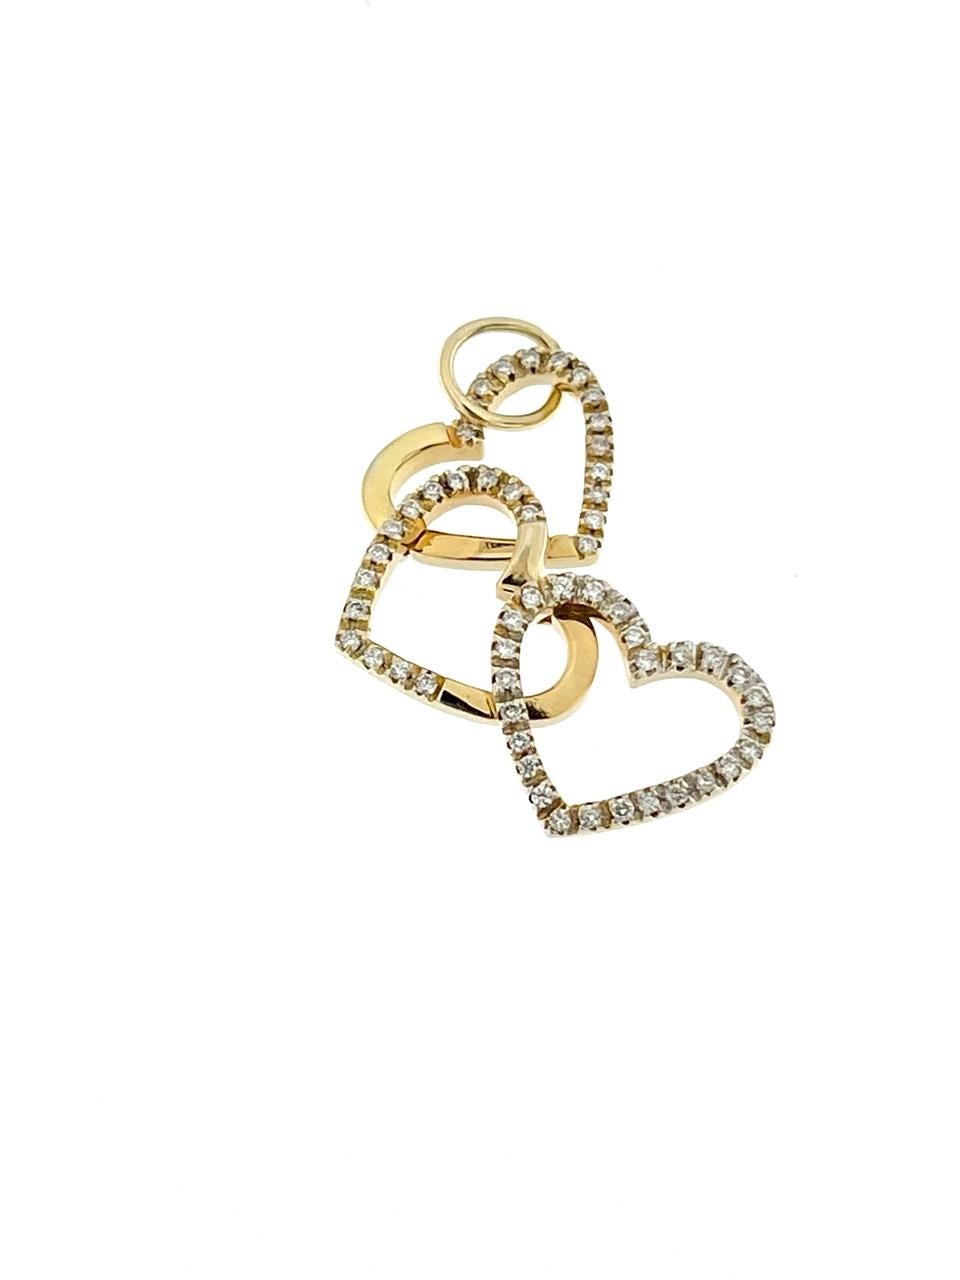 The Italian Triple Heart Pendant in Yellow Gold with Diamonds is a captivating and intricately crafted piece of jewelry that exudes elegance and romance. This pendant showcases a design featuring three interlocking hearts, a classic symbol of love